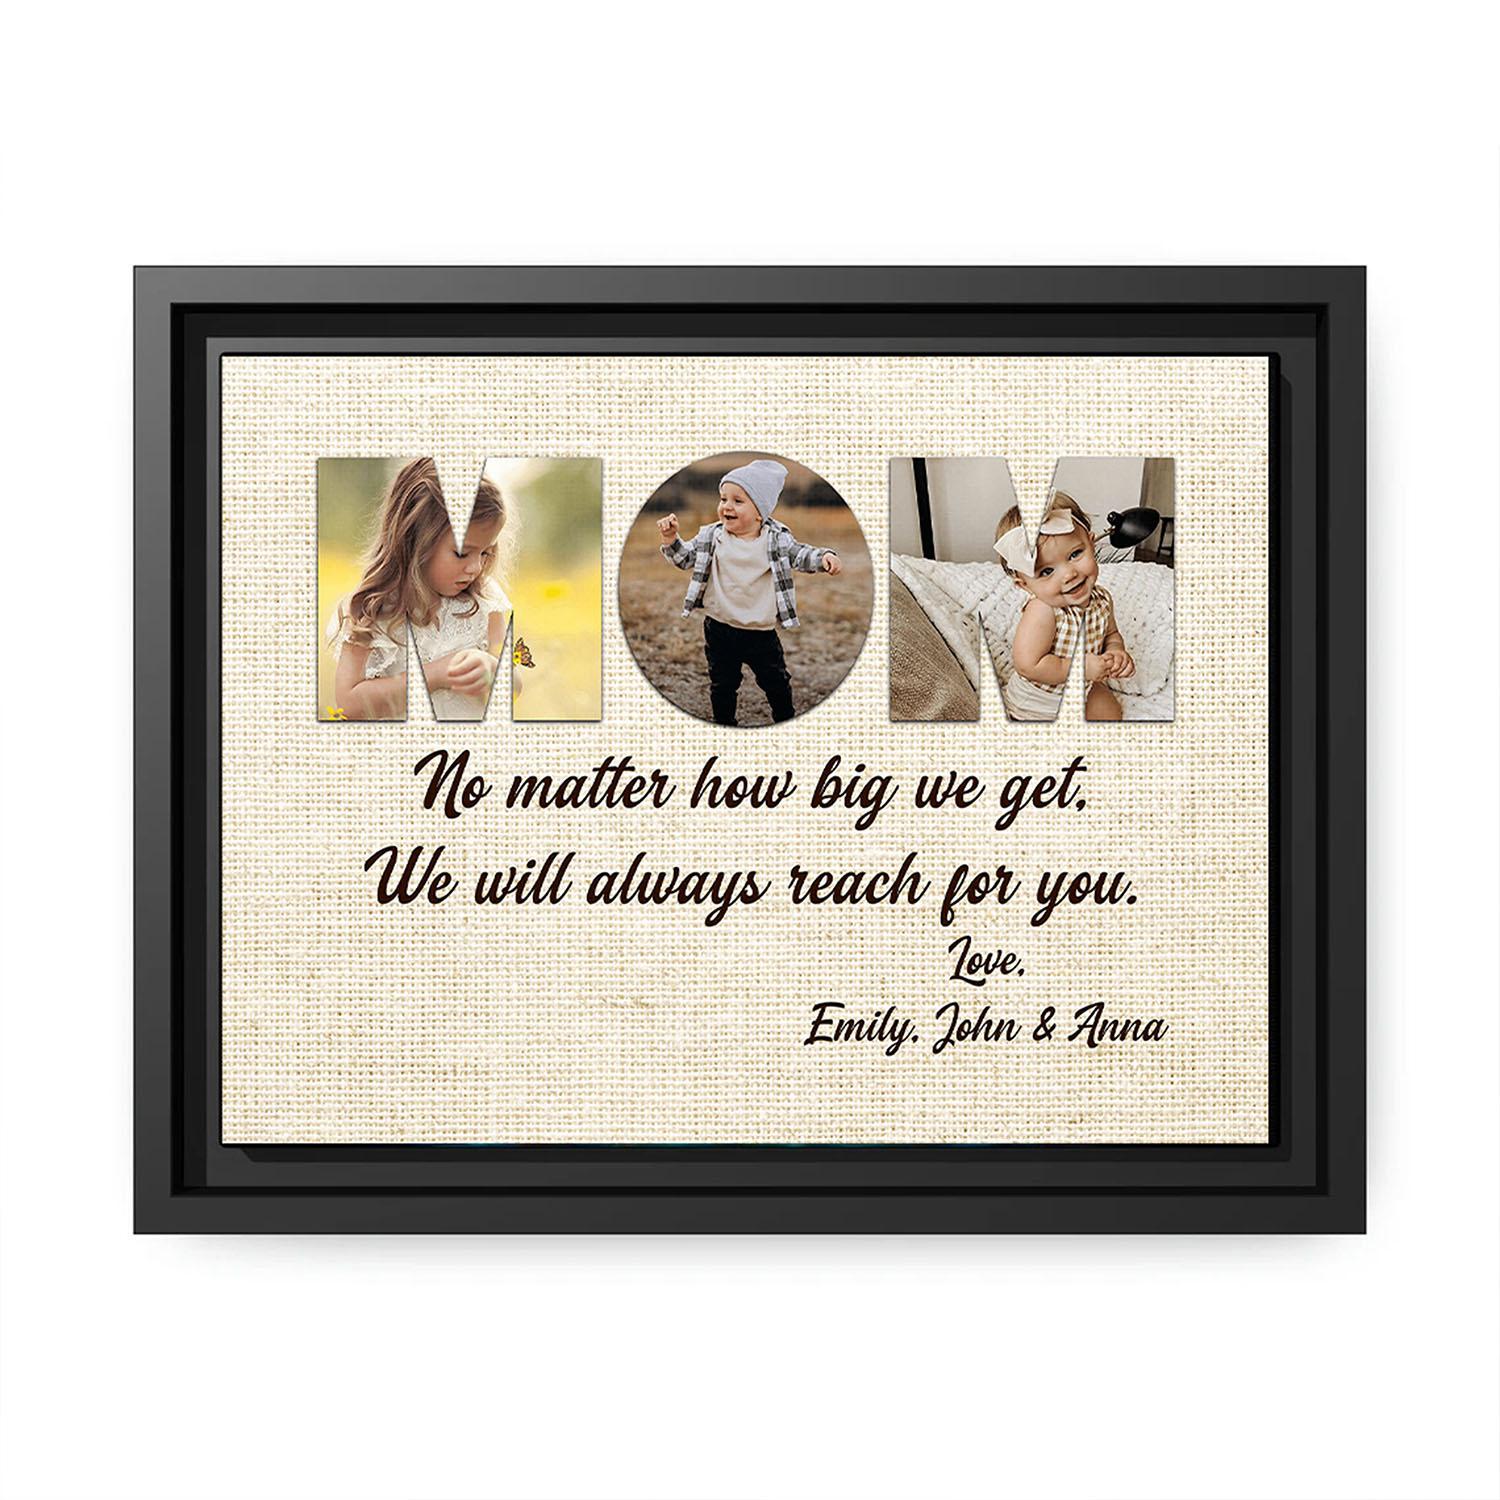 My Greatest Blessings Call Me Mom Picture Canvas, Mom Gifts For Mother's Day,  Unique Personalized Gifts For Mom - Best Personalized Gifts For Everyone